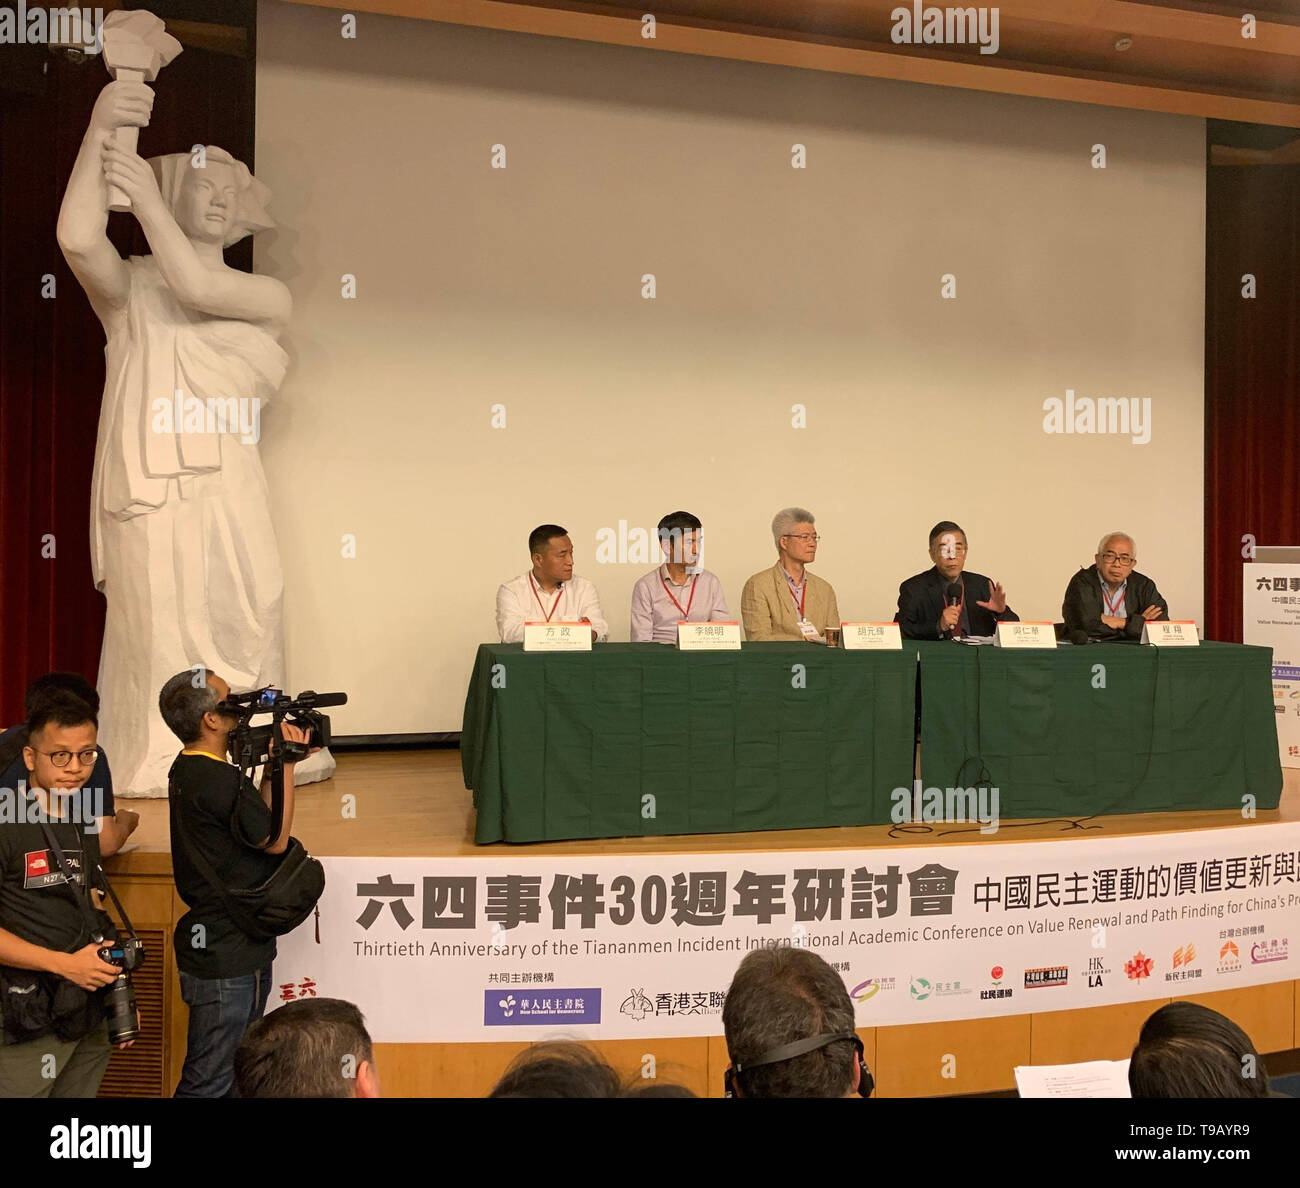 18 May 2019, Taiwan, Taipeh: Civil rights Fang Zheng (l-r), Li Xiaoming, former officer of the troops in the evacuation of Tian'anmen Square, moderator Professor Hu Yuan-hui, Tian'anmen researcher Wu Ren-hua and Ching Cheong, commentator and former reporter of the Hong Kong newspaper Wen Wei Po at a conference in Taipei. The former student leaders, civil rights activists, politicians, researchers from Hong Kong, Taiwan and the USA also called on Saturday for an honest reappraisal of the dark chapter of Chinese history (to dpa: '30 years after Tian'anmen massacre: Warning of threat from China') Stock Photo